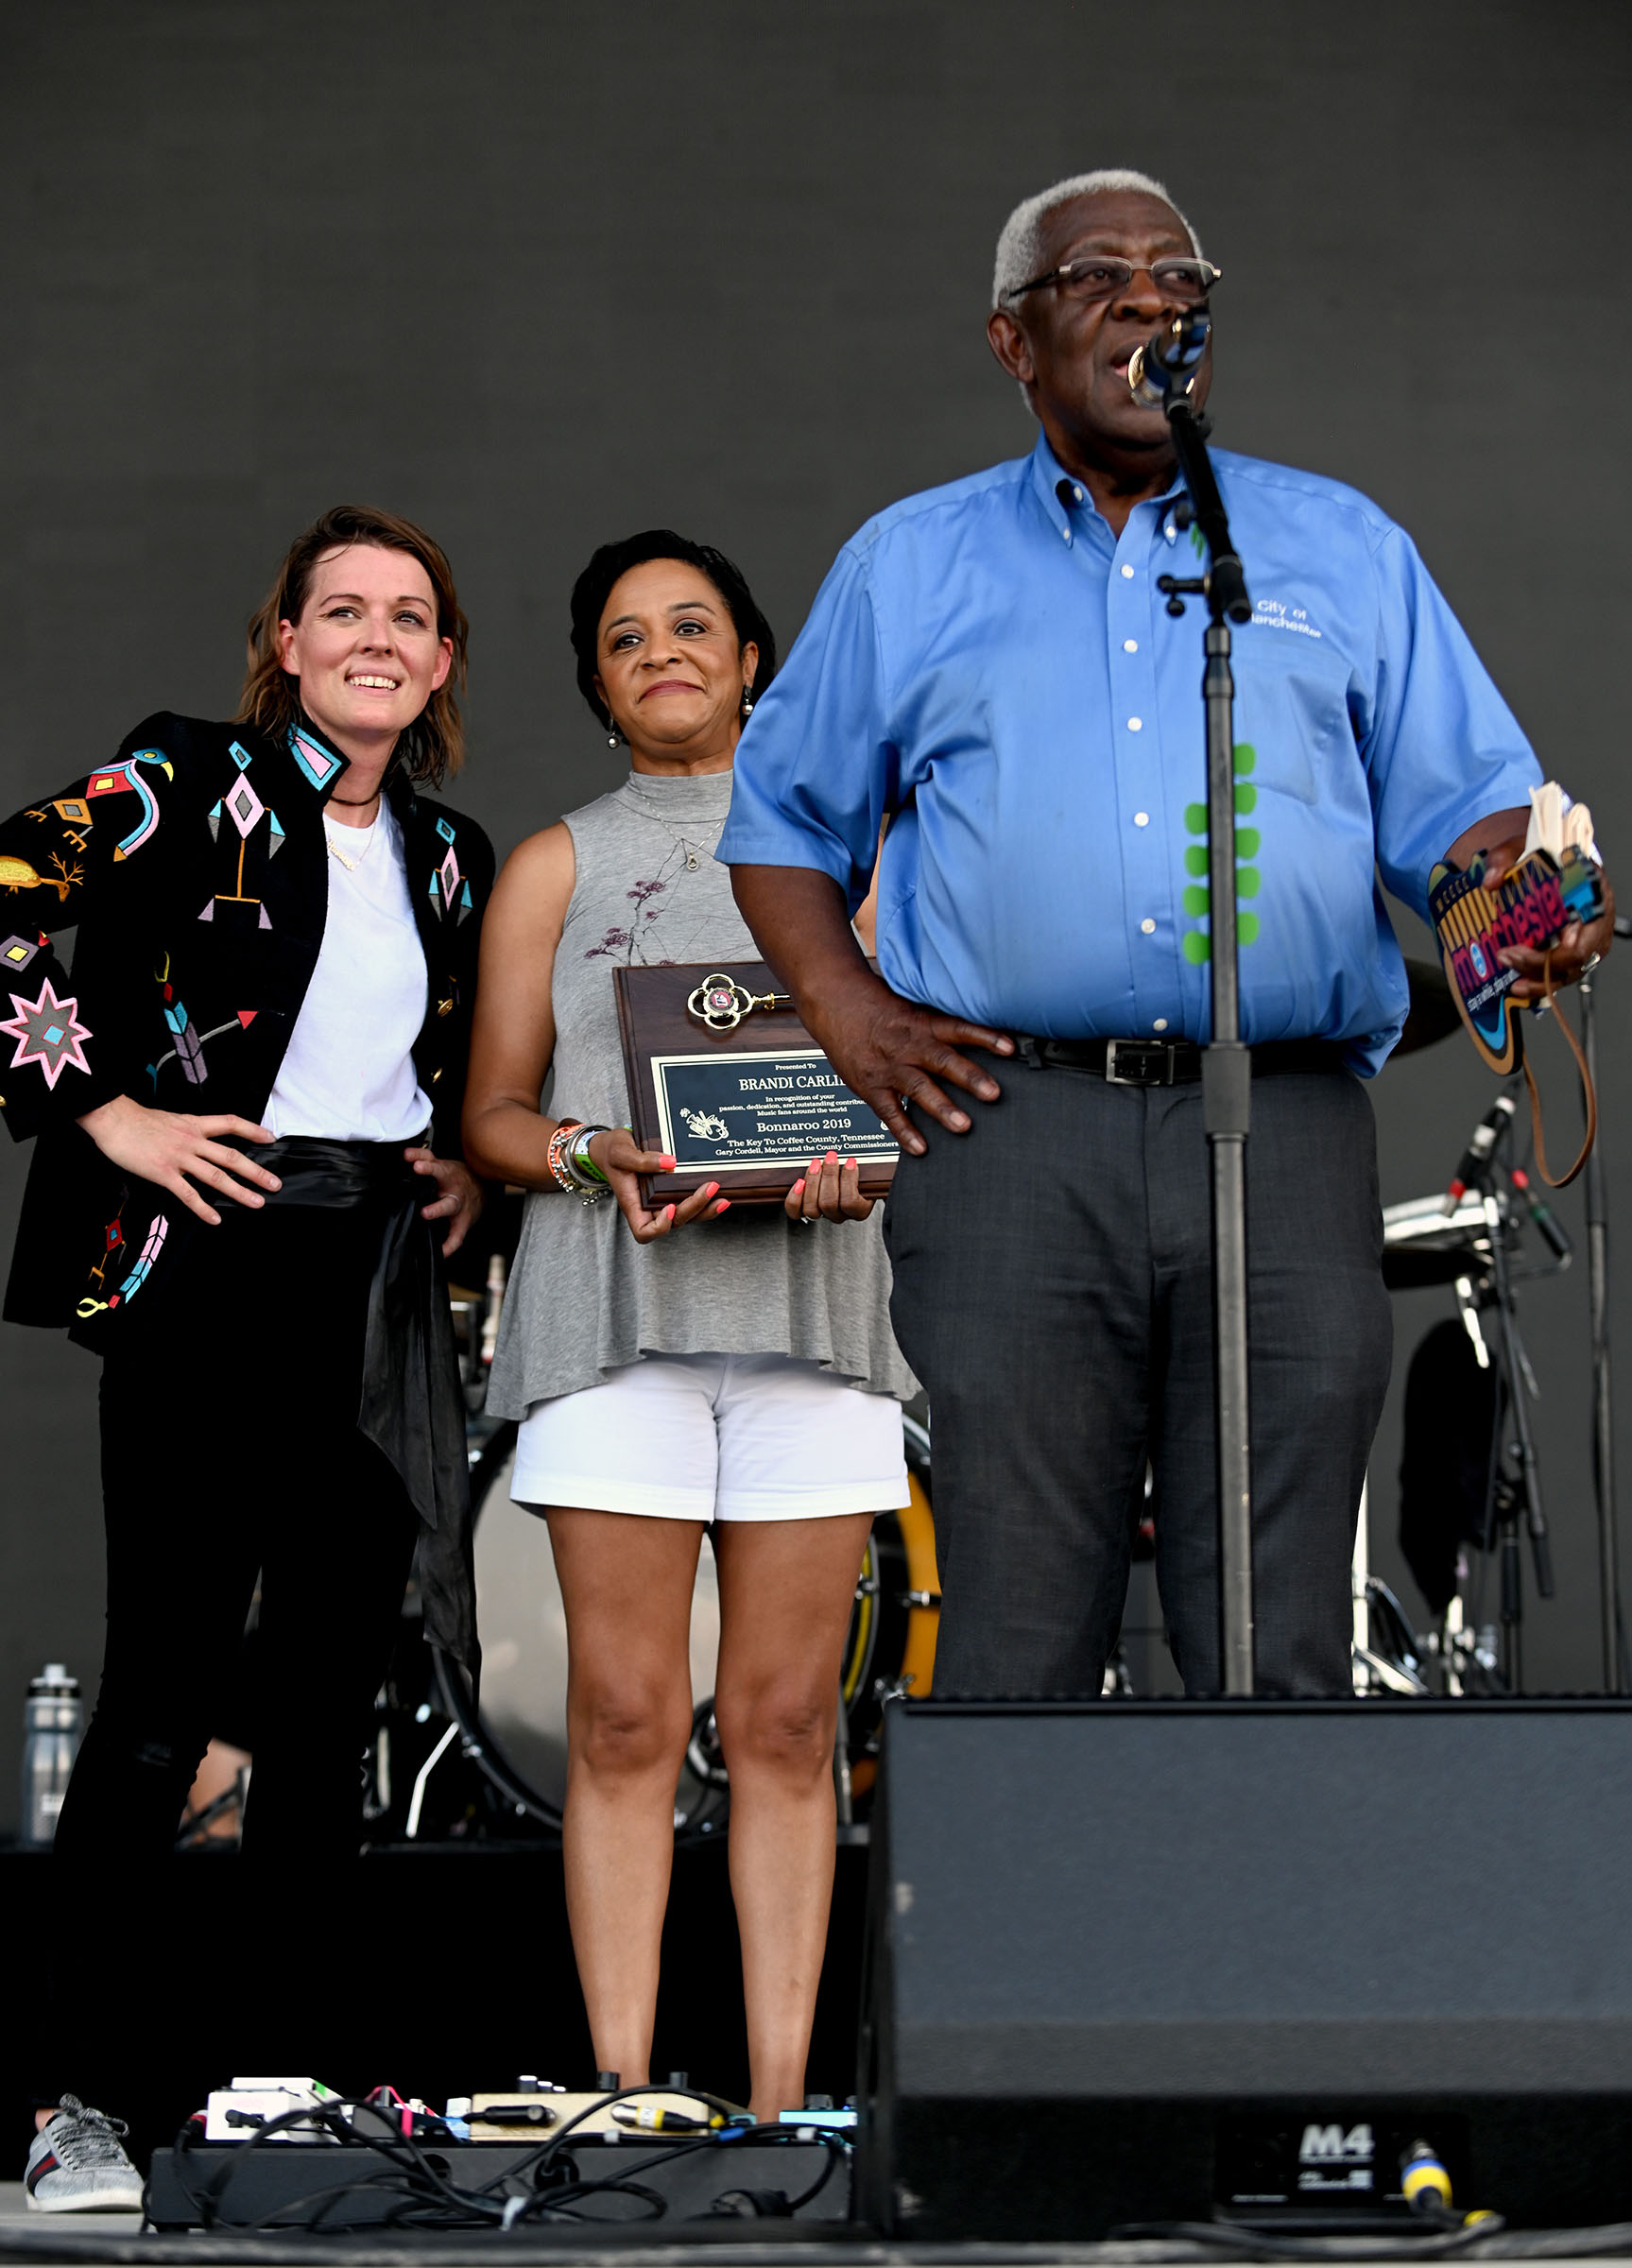 Manchester Mayor Lonnie Norman (far R) and Brandi Carlile (far L) onstage during the 2019 Bonnaroo Arts And Music Festival in Manchester, Tennessee on June 16, 2019. (FilmMagic for Bonnaroo Arts And Music Festival)